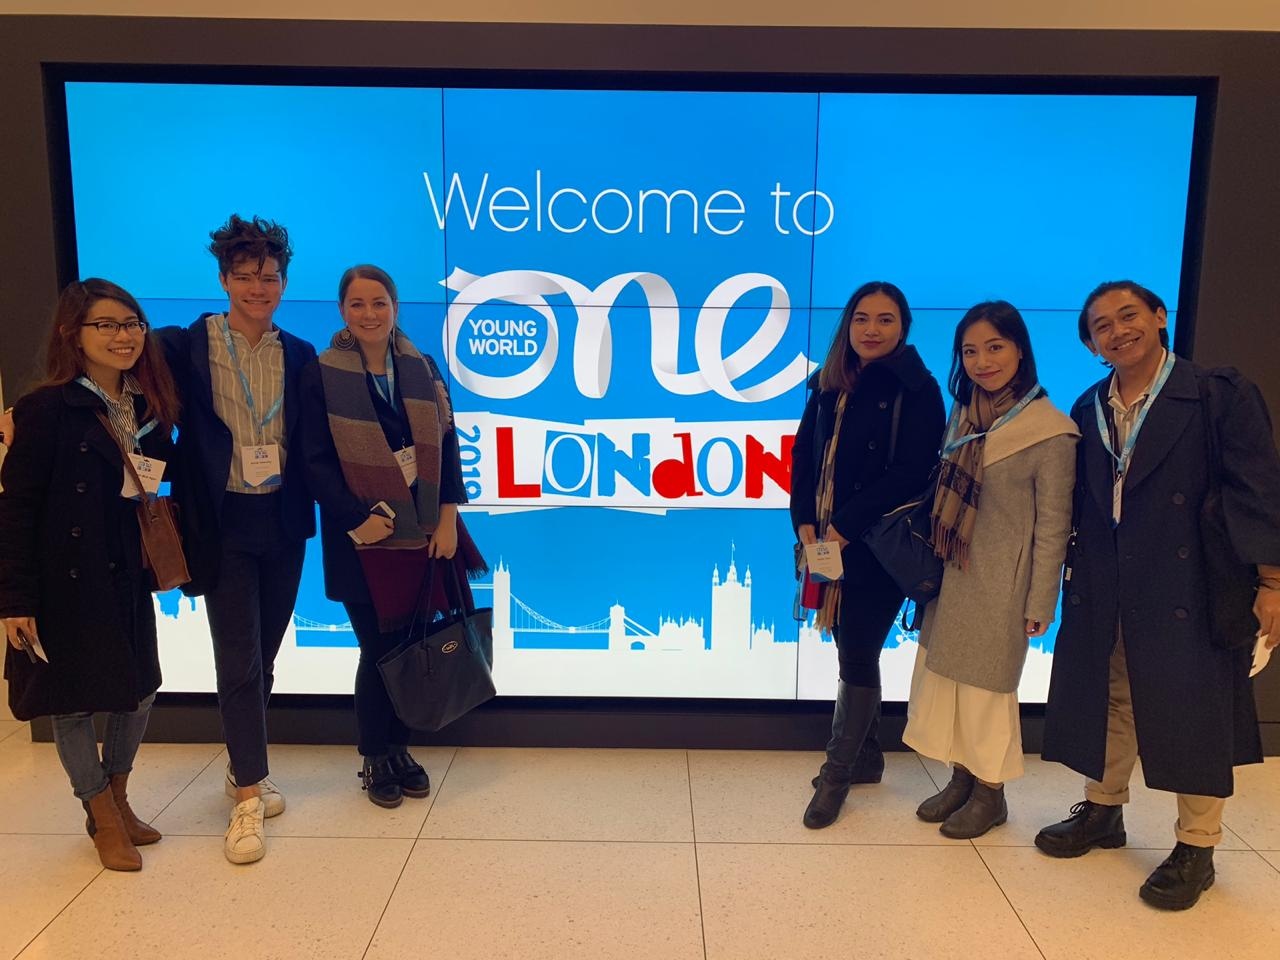 Thuy (second from right) represented Wavemaker Vietnam at the One Young World 2019 Global Summit in London.  